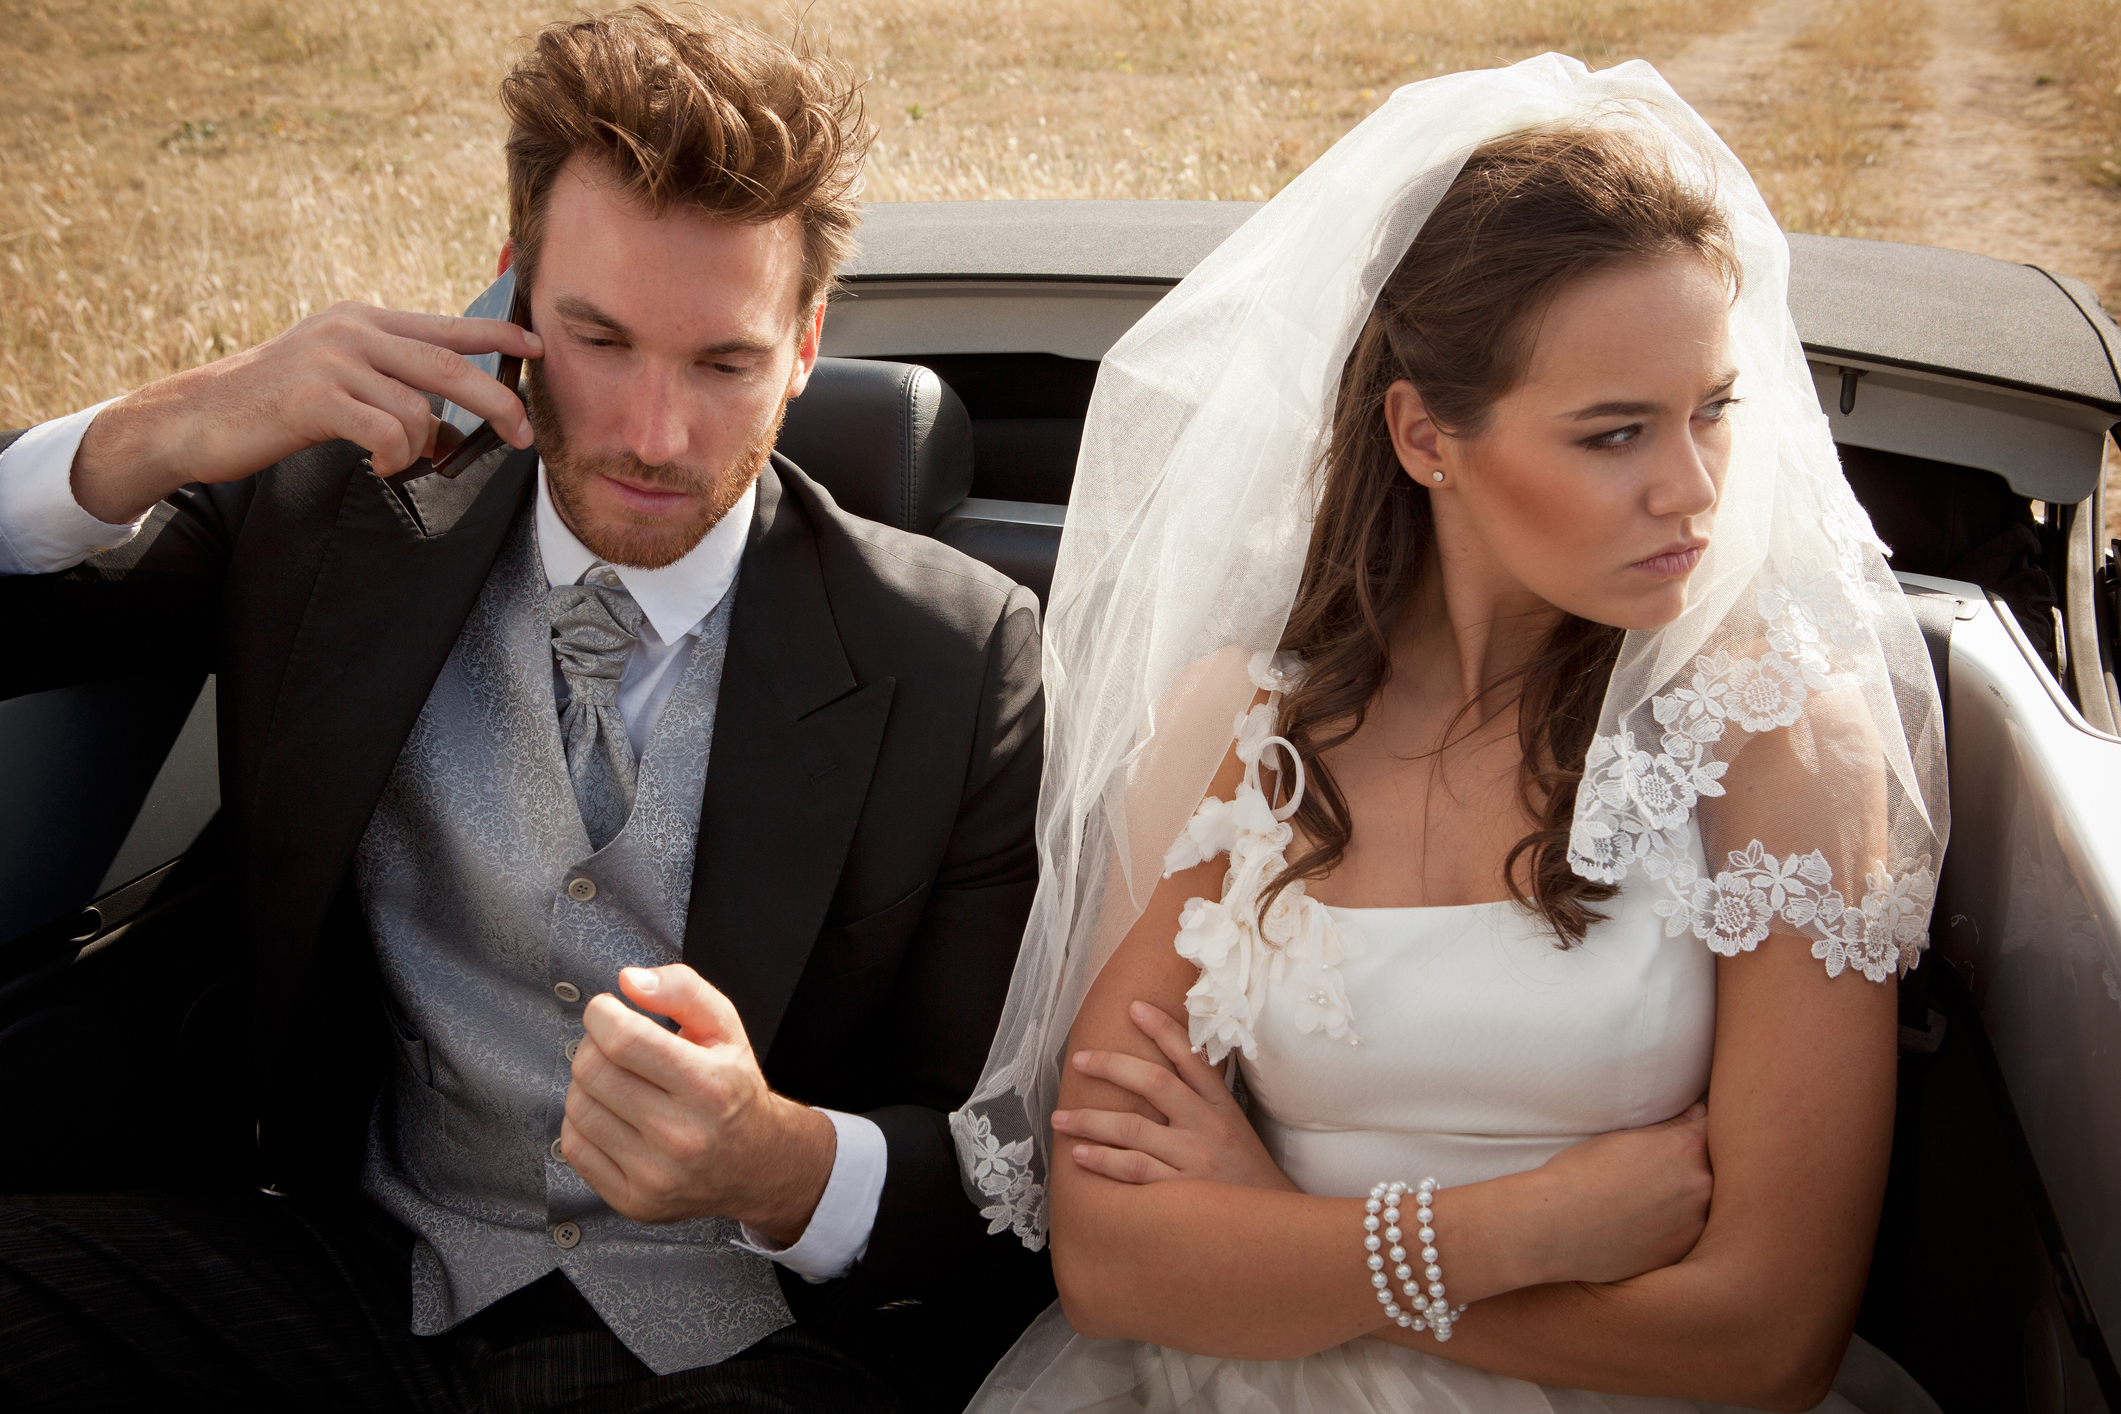 A bride and groom appearing distressed while sitting in a convertible; the groom is on the phone